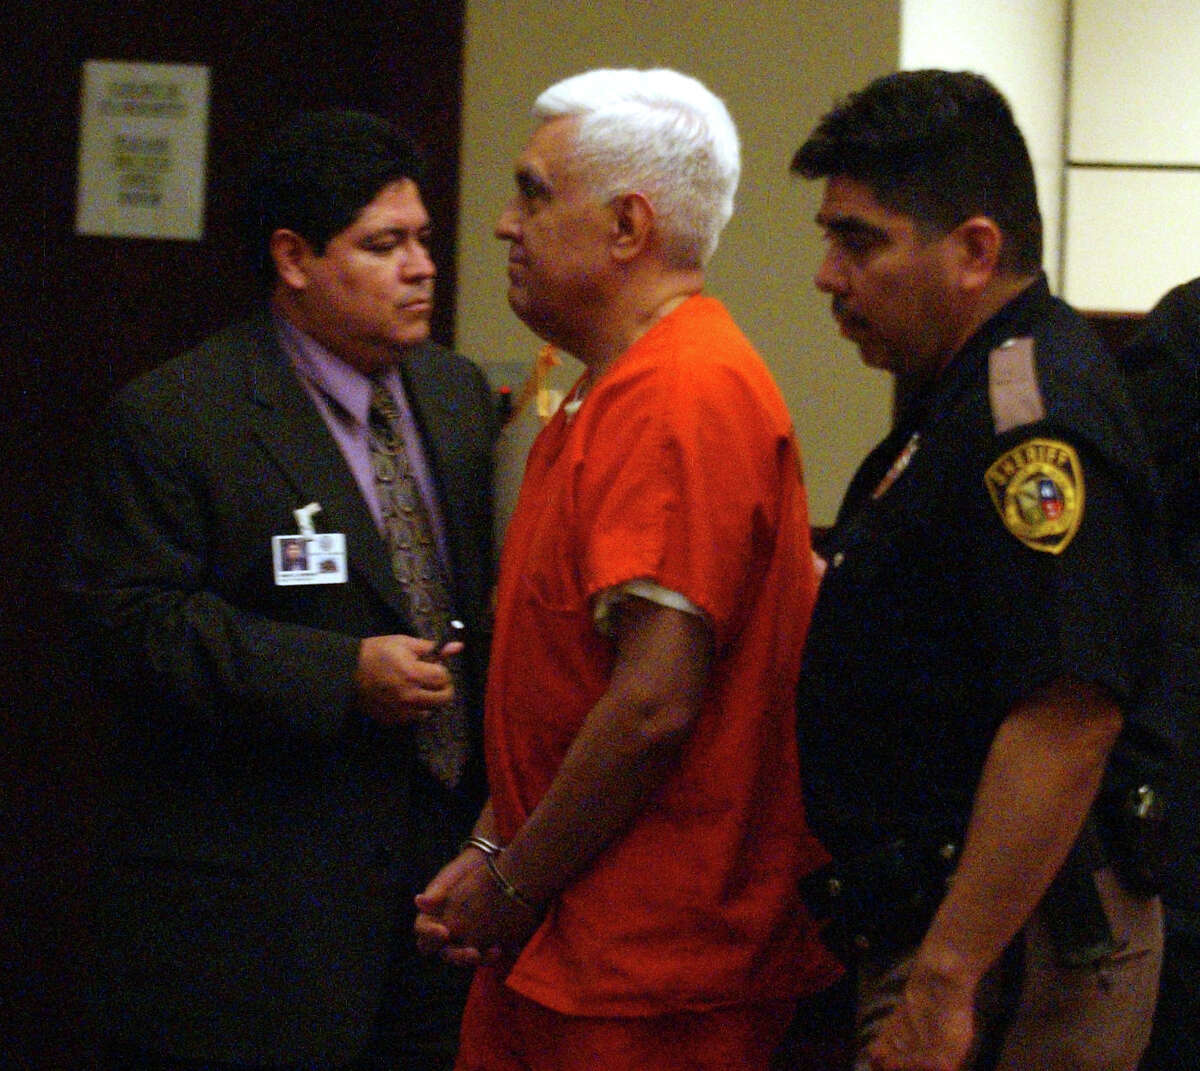 Former Councilman Raul Prado is led away after receiving a four-year prison term for his role in a public corruption scandal. He pleaded guilty to bribery charges and was sentenced in 2004. 